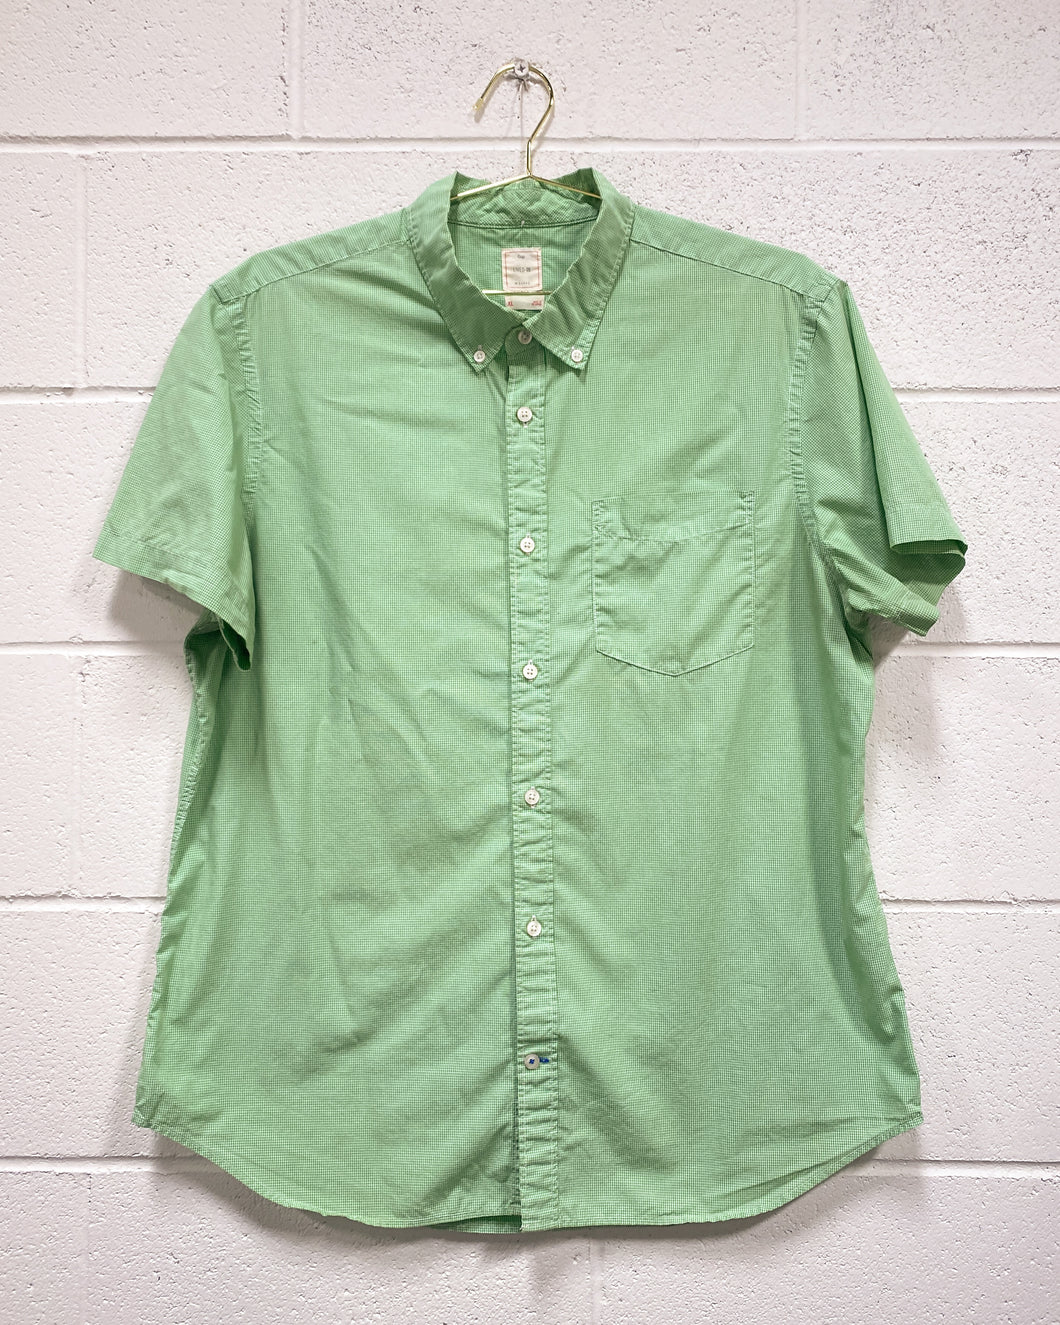 Gap “Lived-In” Green Button Up (XL)